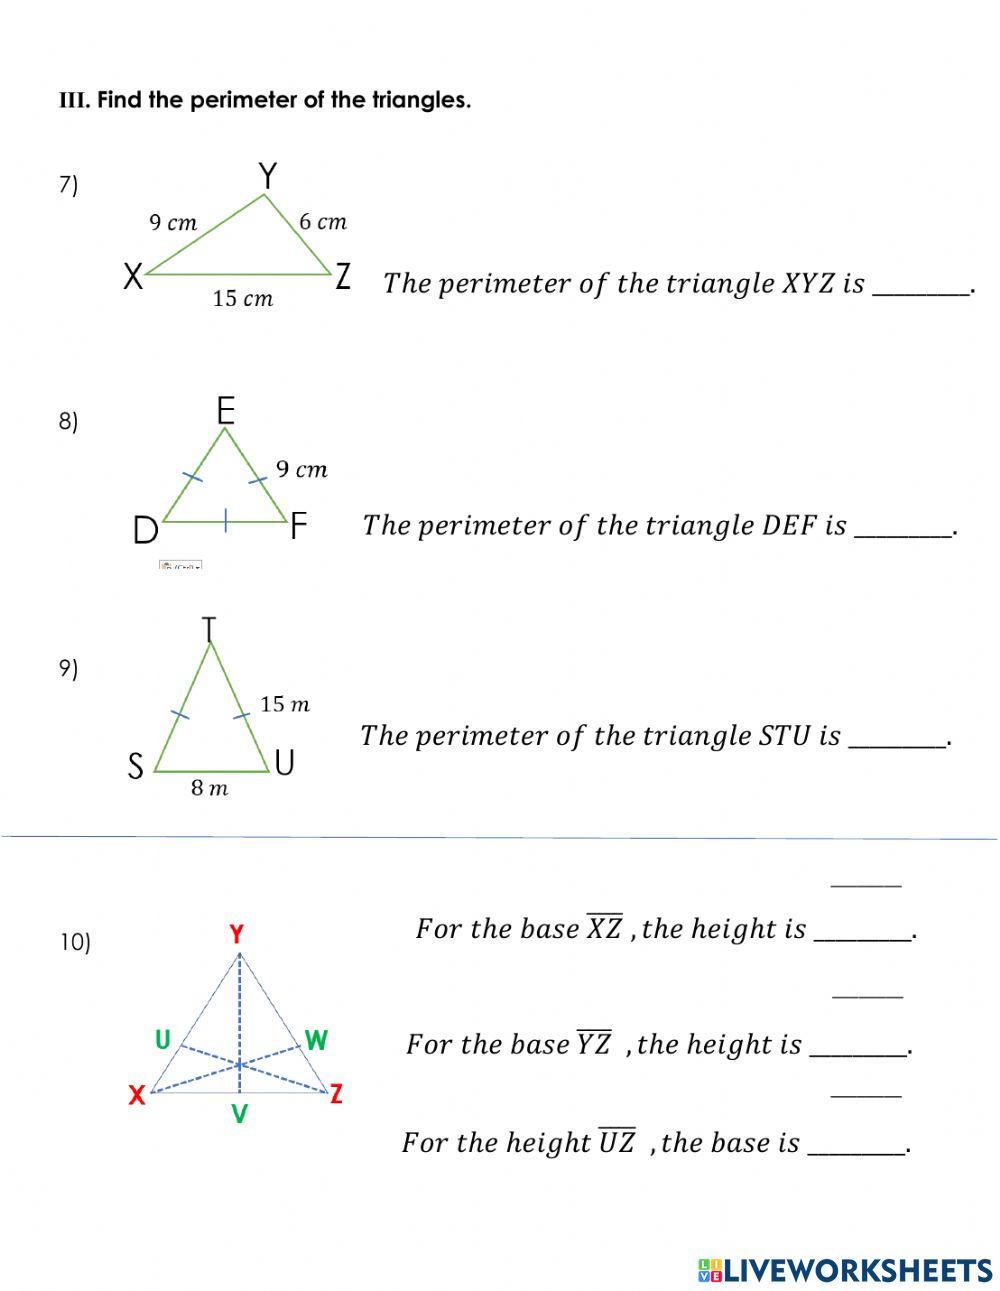 P6    Perimeters and Height of triangles